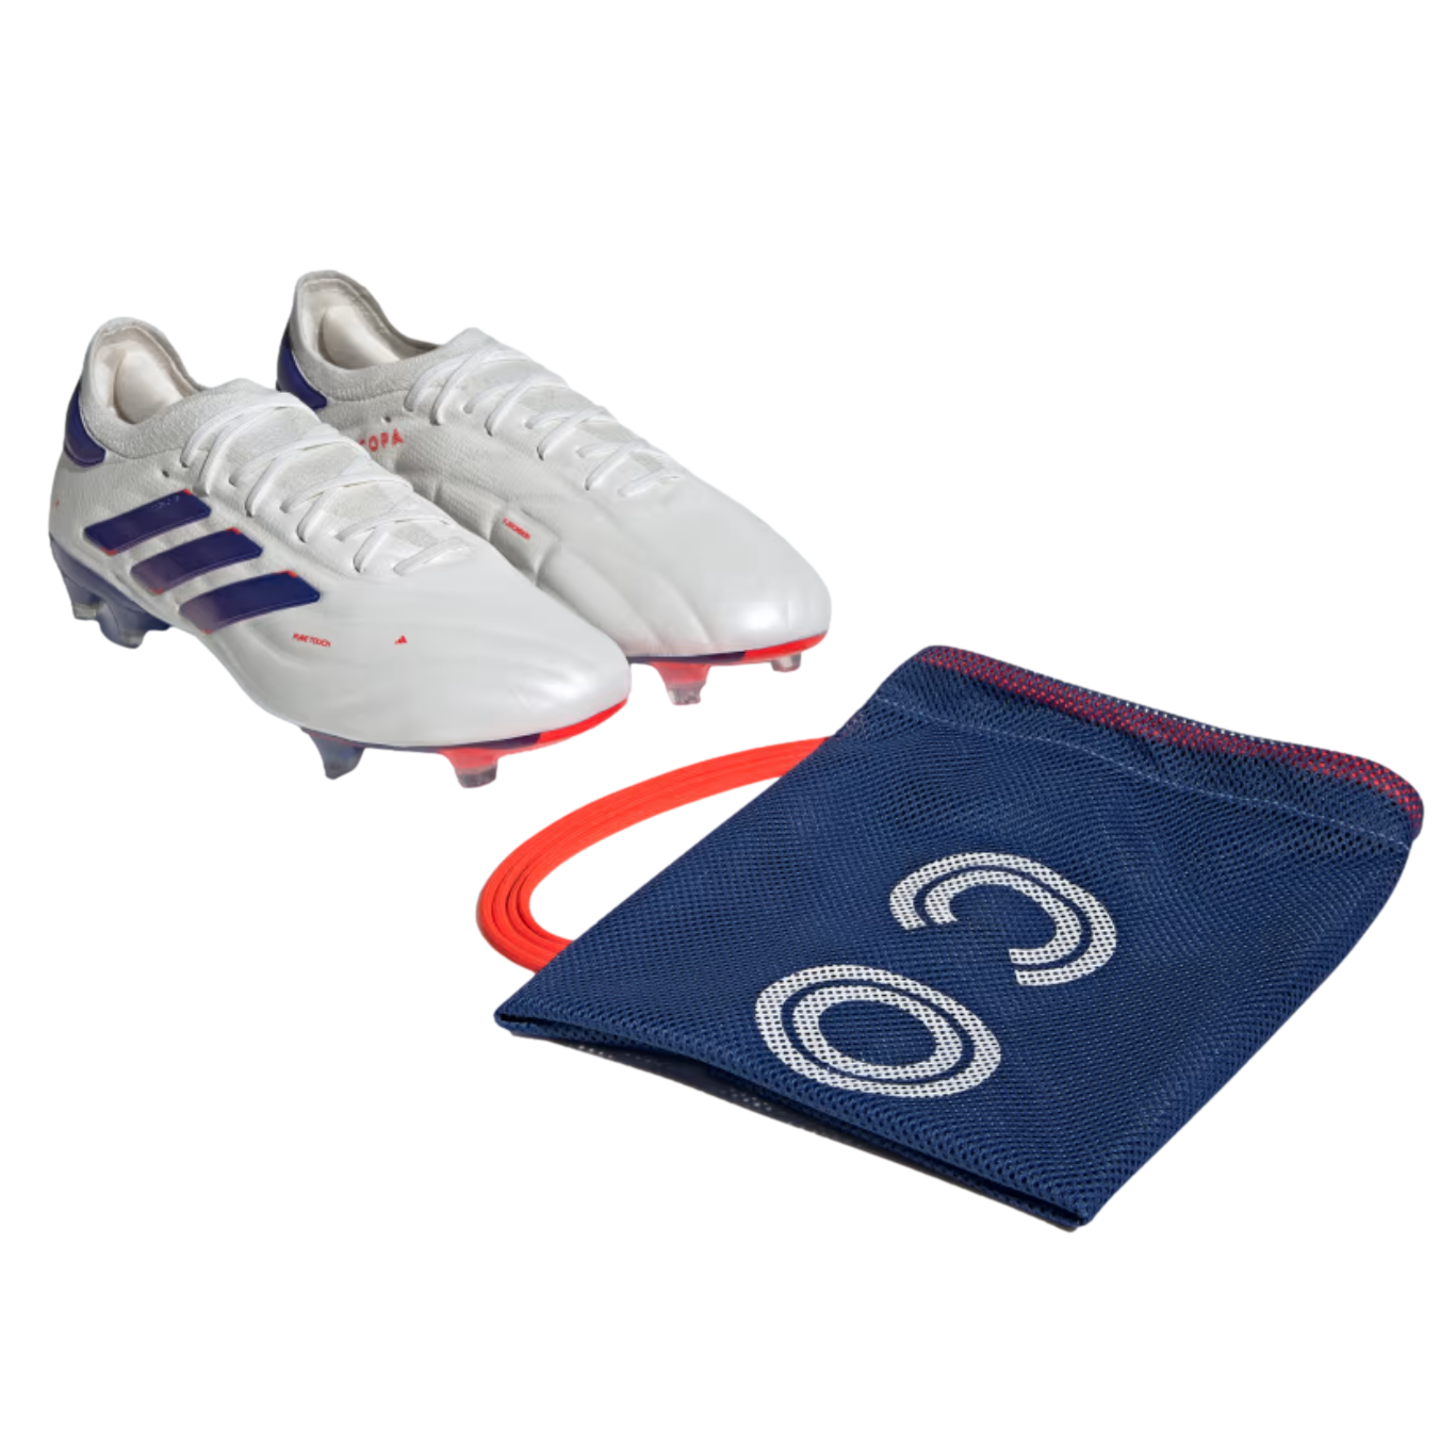 Adidas Copa Pure 2 Elite KT Firm Ground Cleats